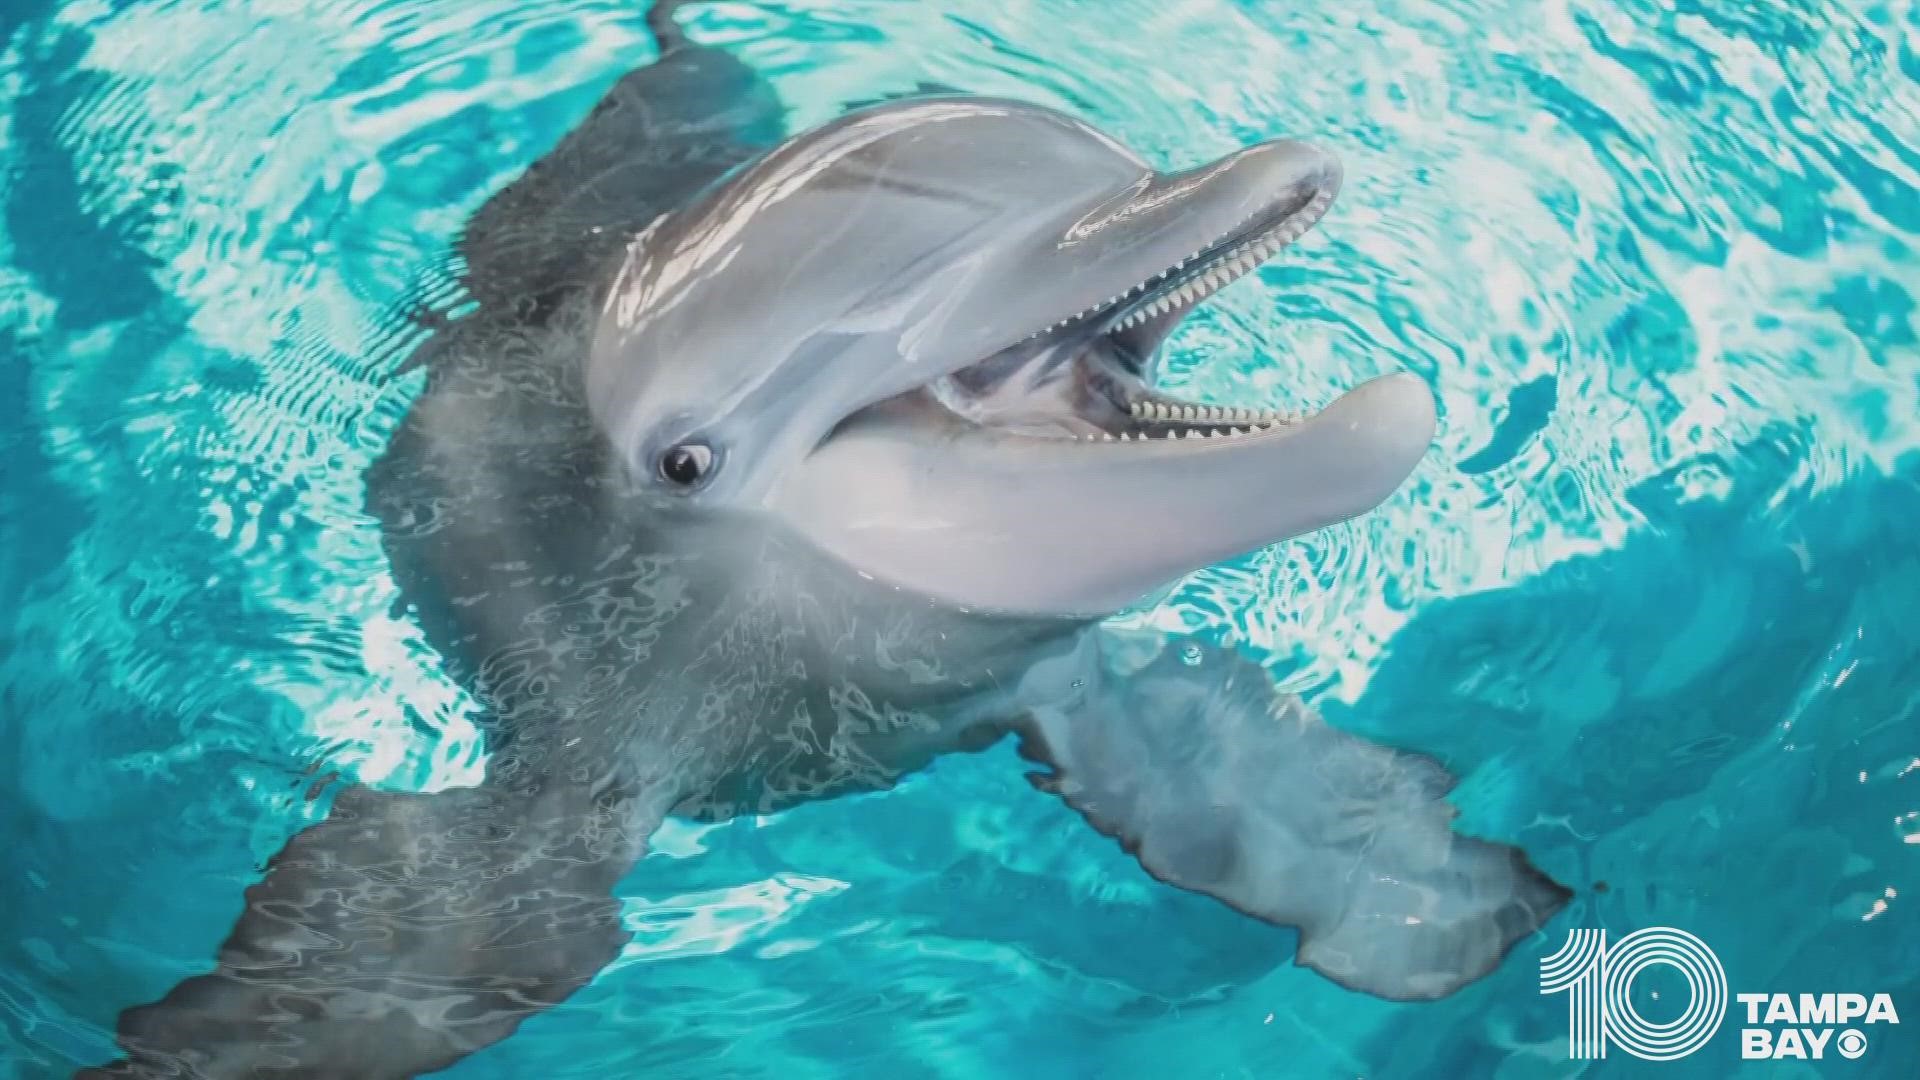 Clearwater Marine Aquarium says Winter the Dolphin died Thursday after days of fighting a gastrointestinal infection.